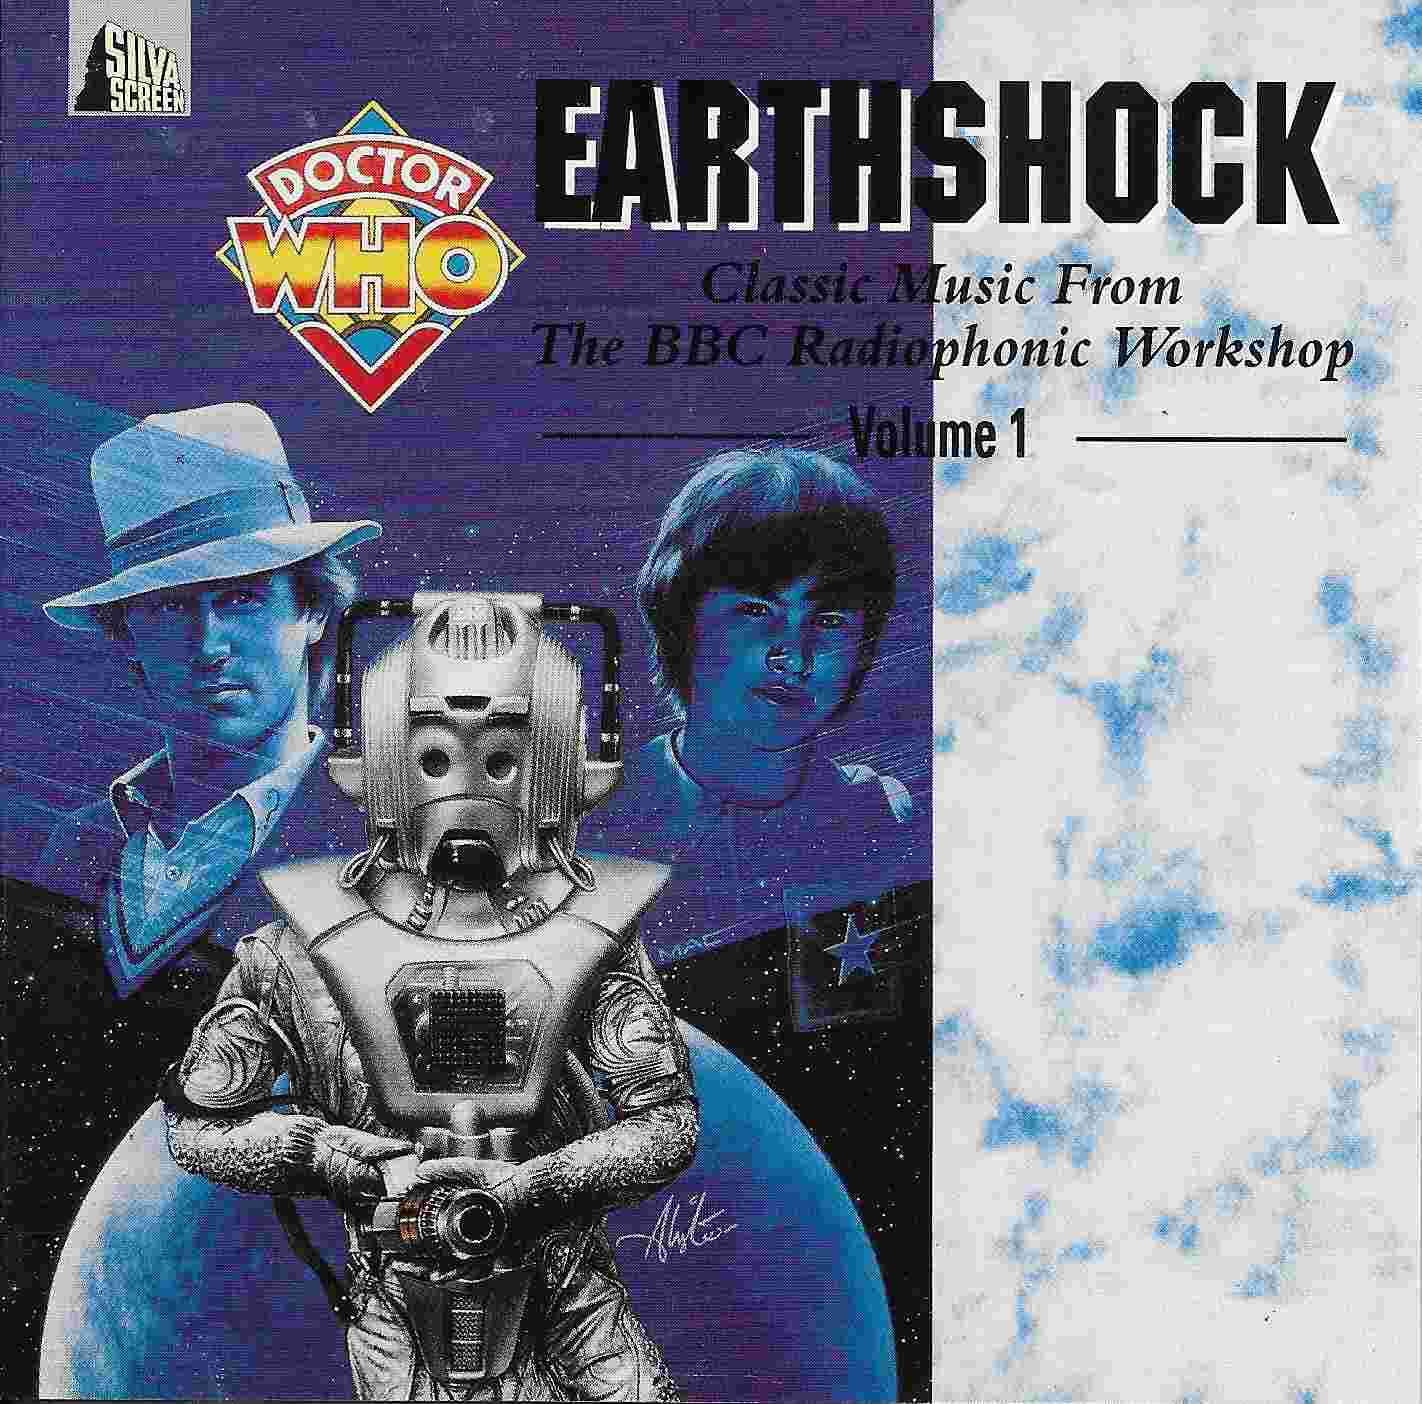 Picture of Earthshock - Doctor who the music - Volume 1 by artist Various from the BBC cds - Records and Tapes library